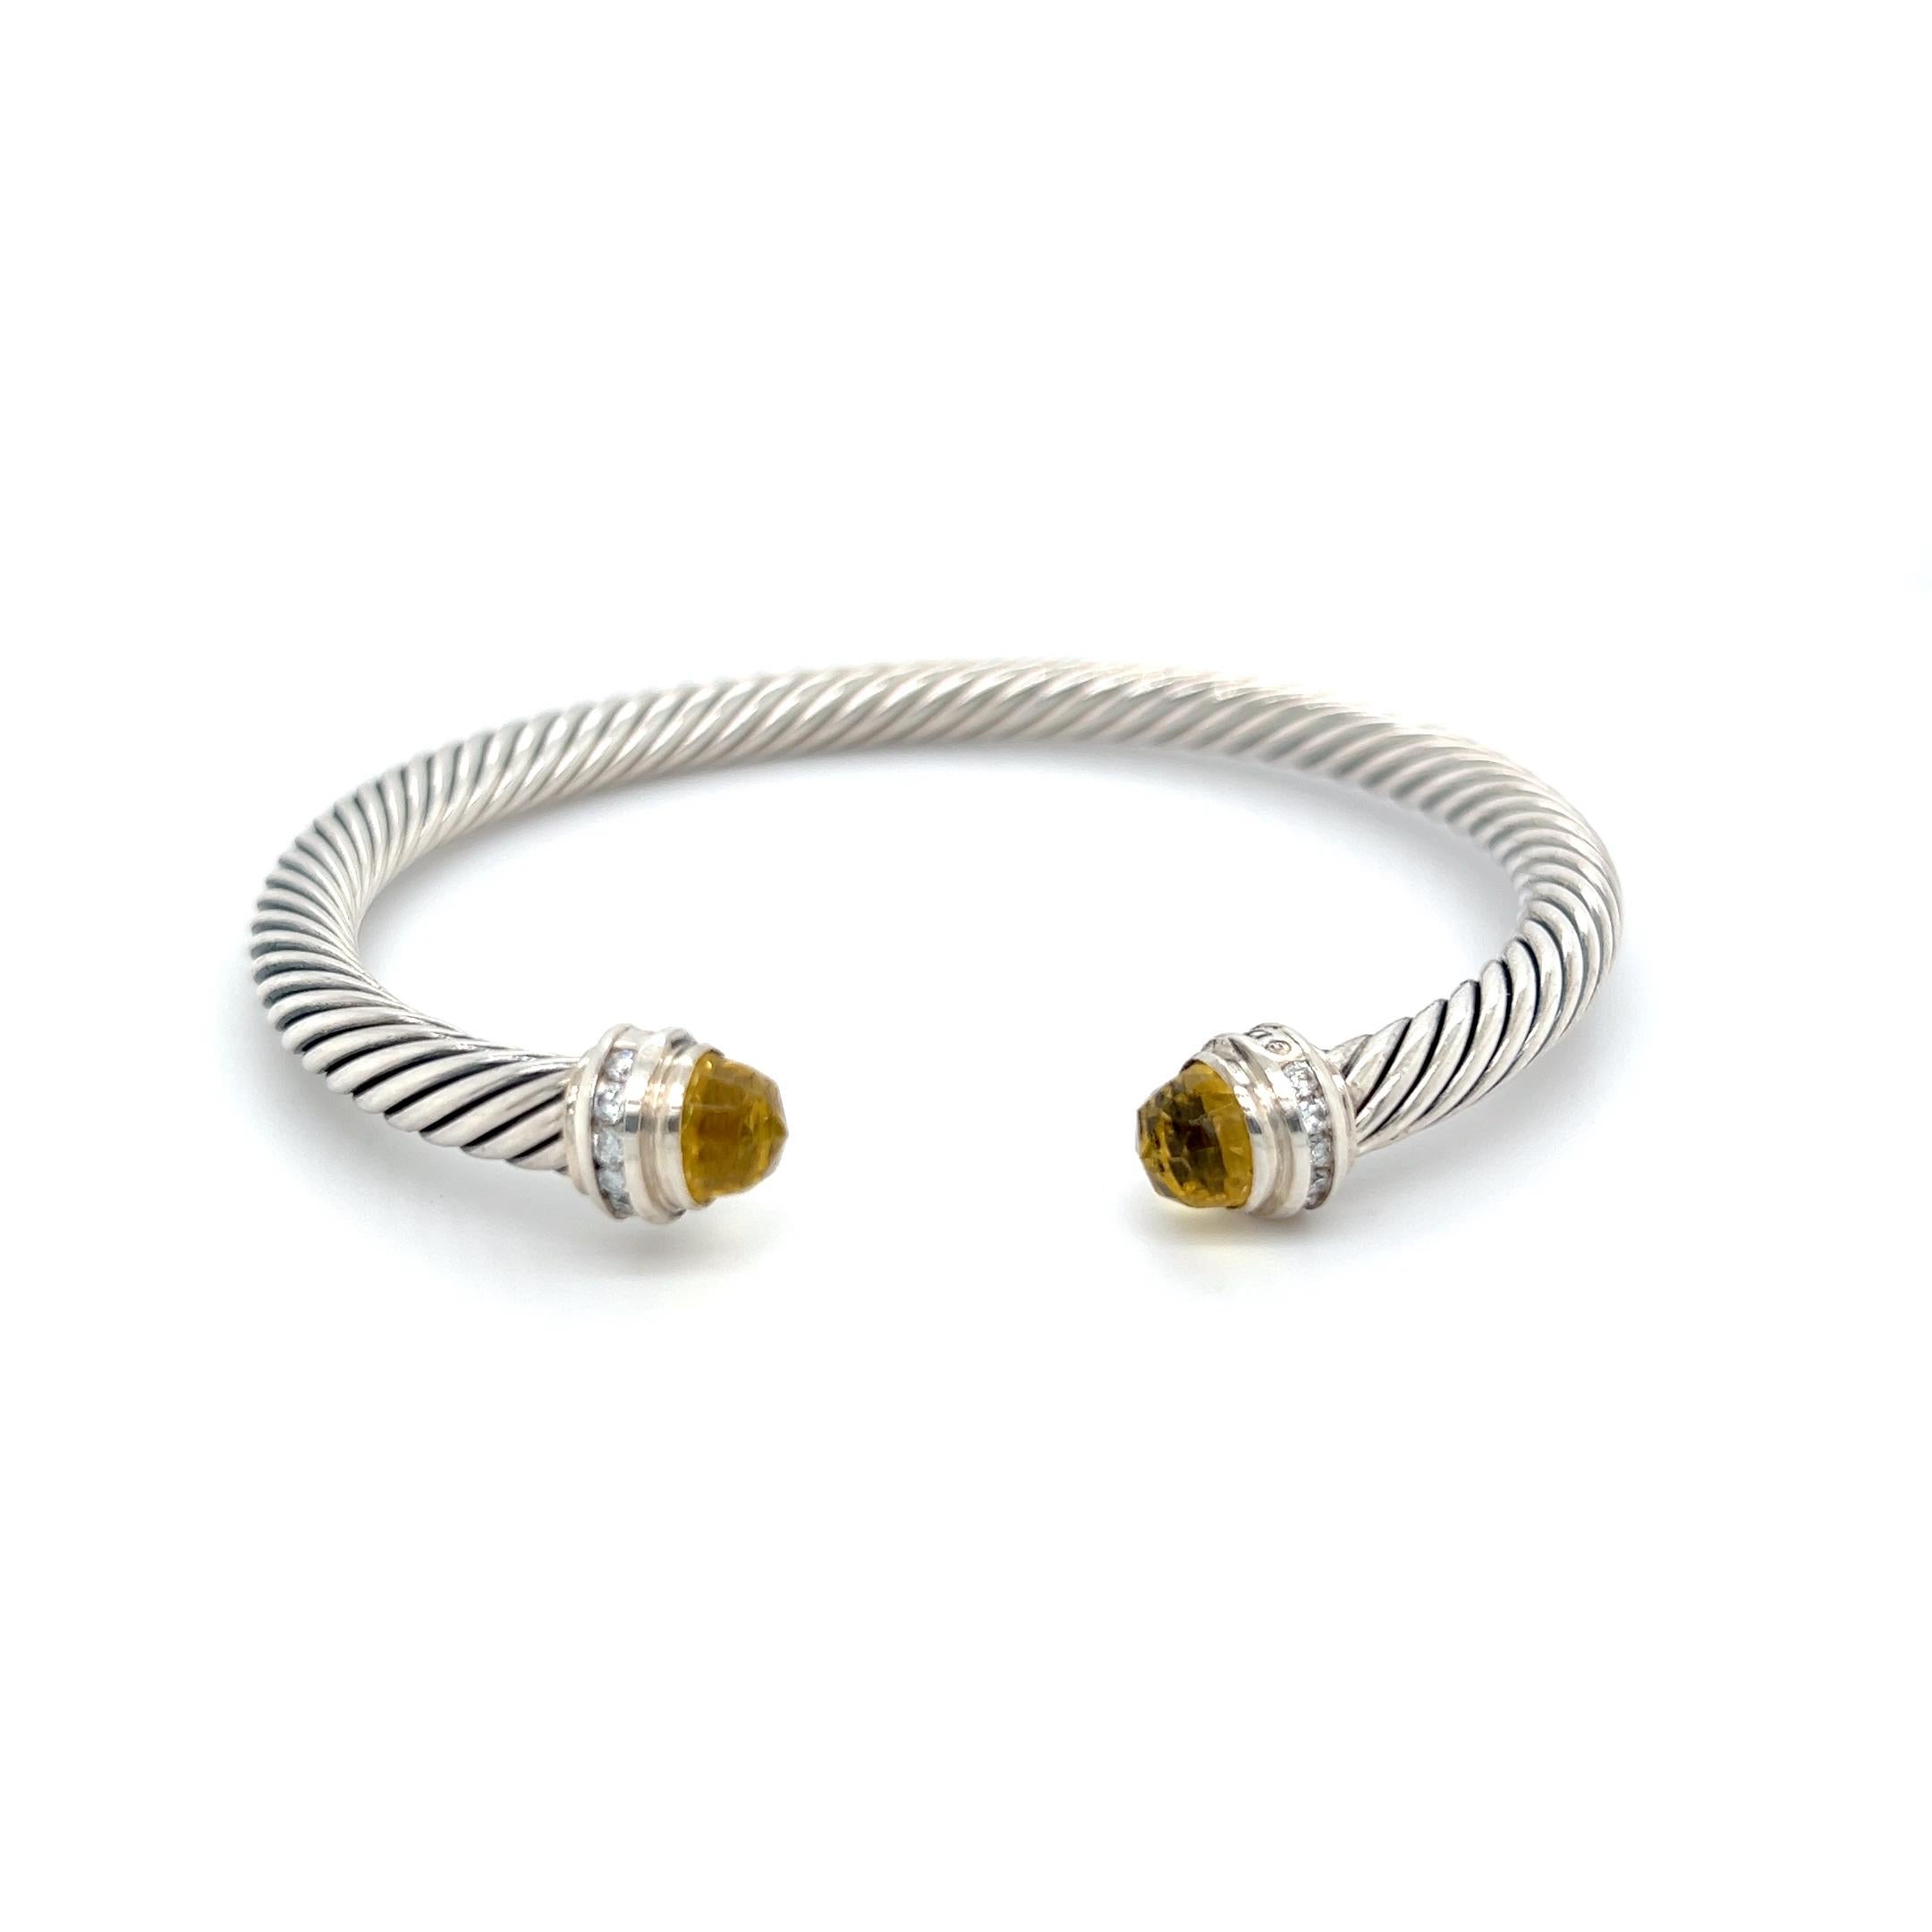 David Yurman Sterling Silver 14K Yellow Gold Citrine 5mm Cable Bangle Bracelet In Excellent Condition For Sale In Boca Raton, FL